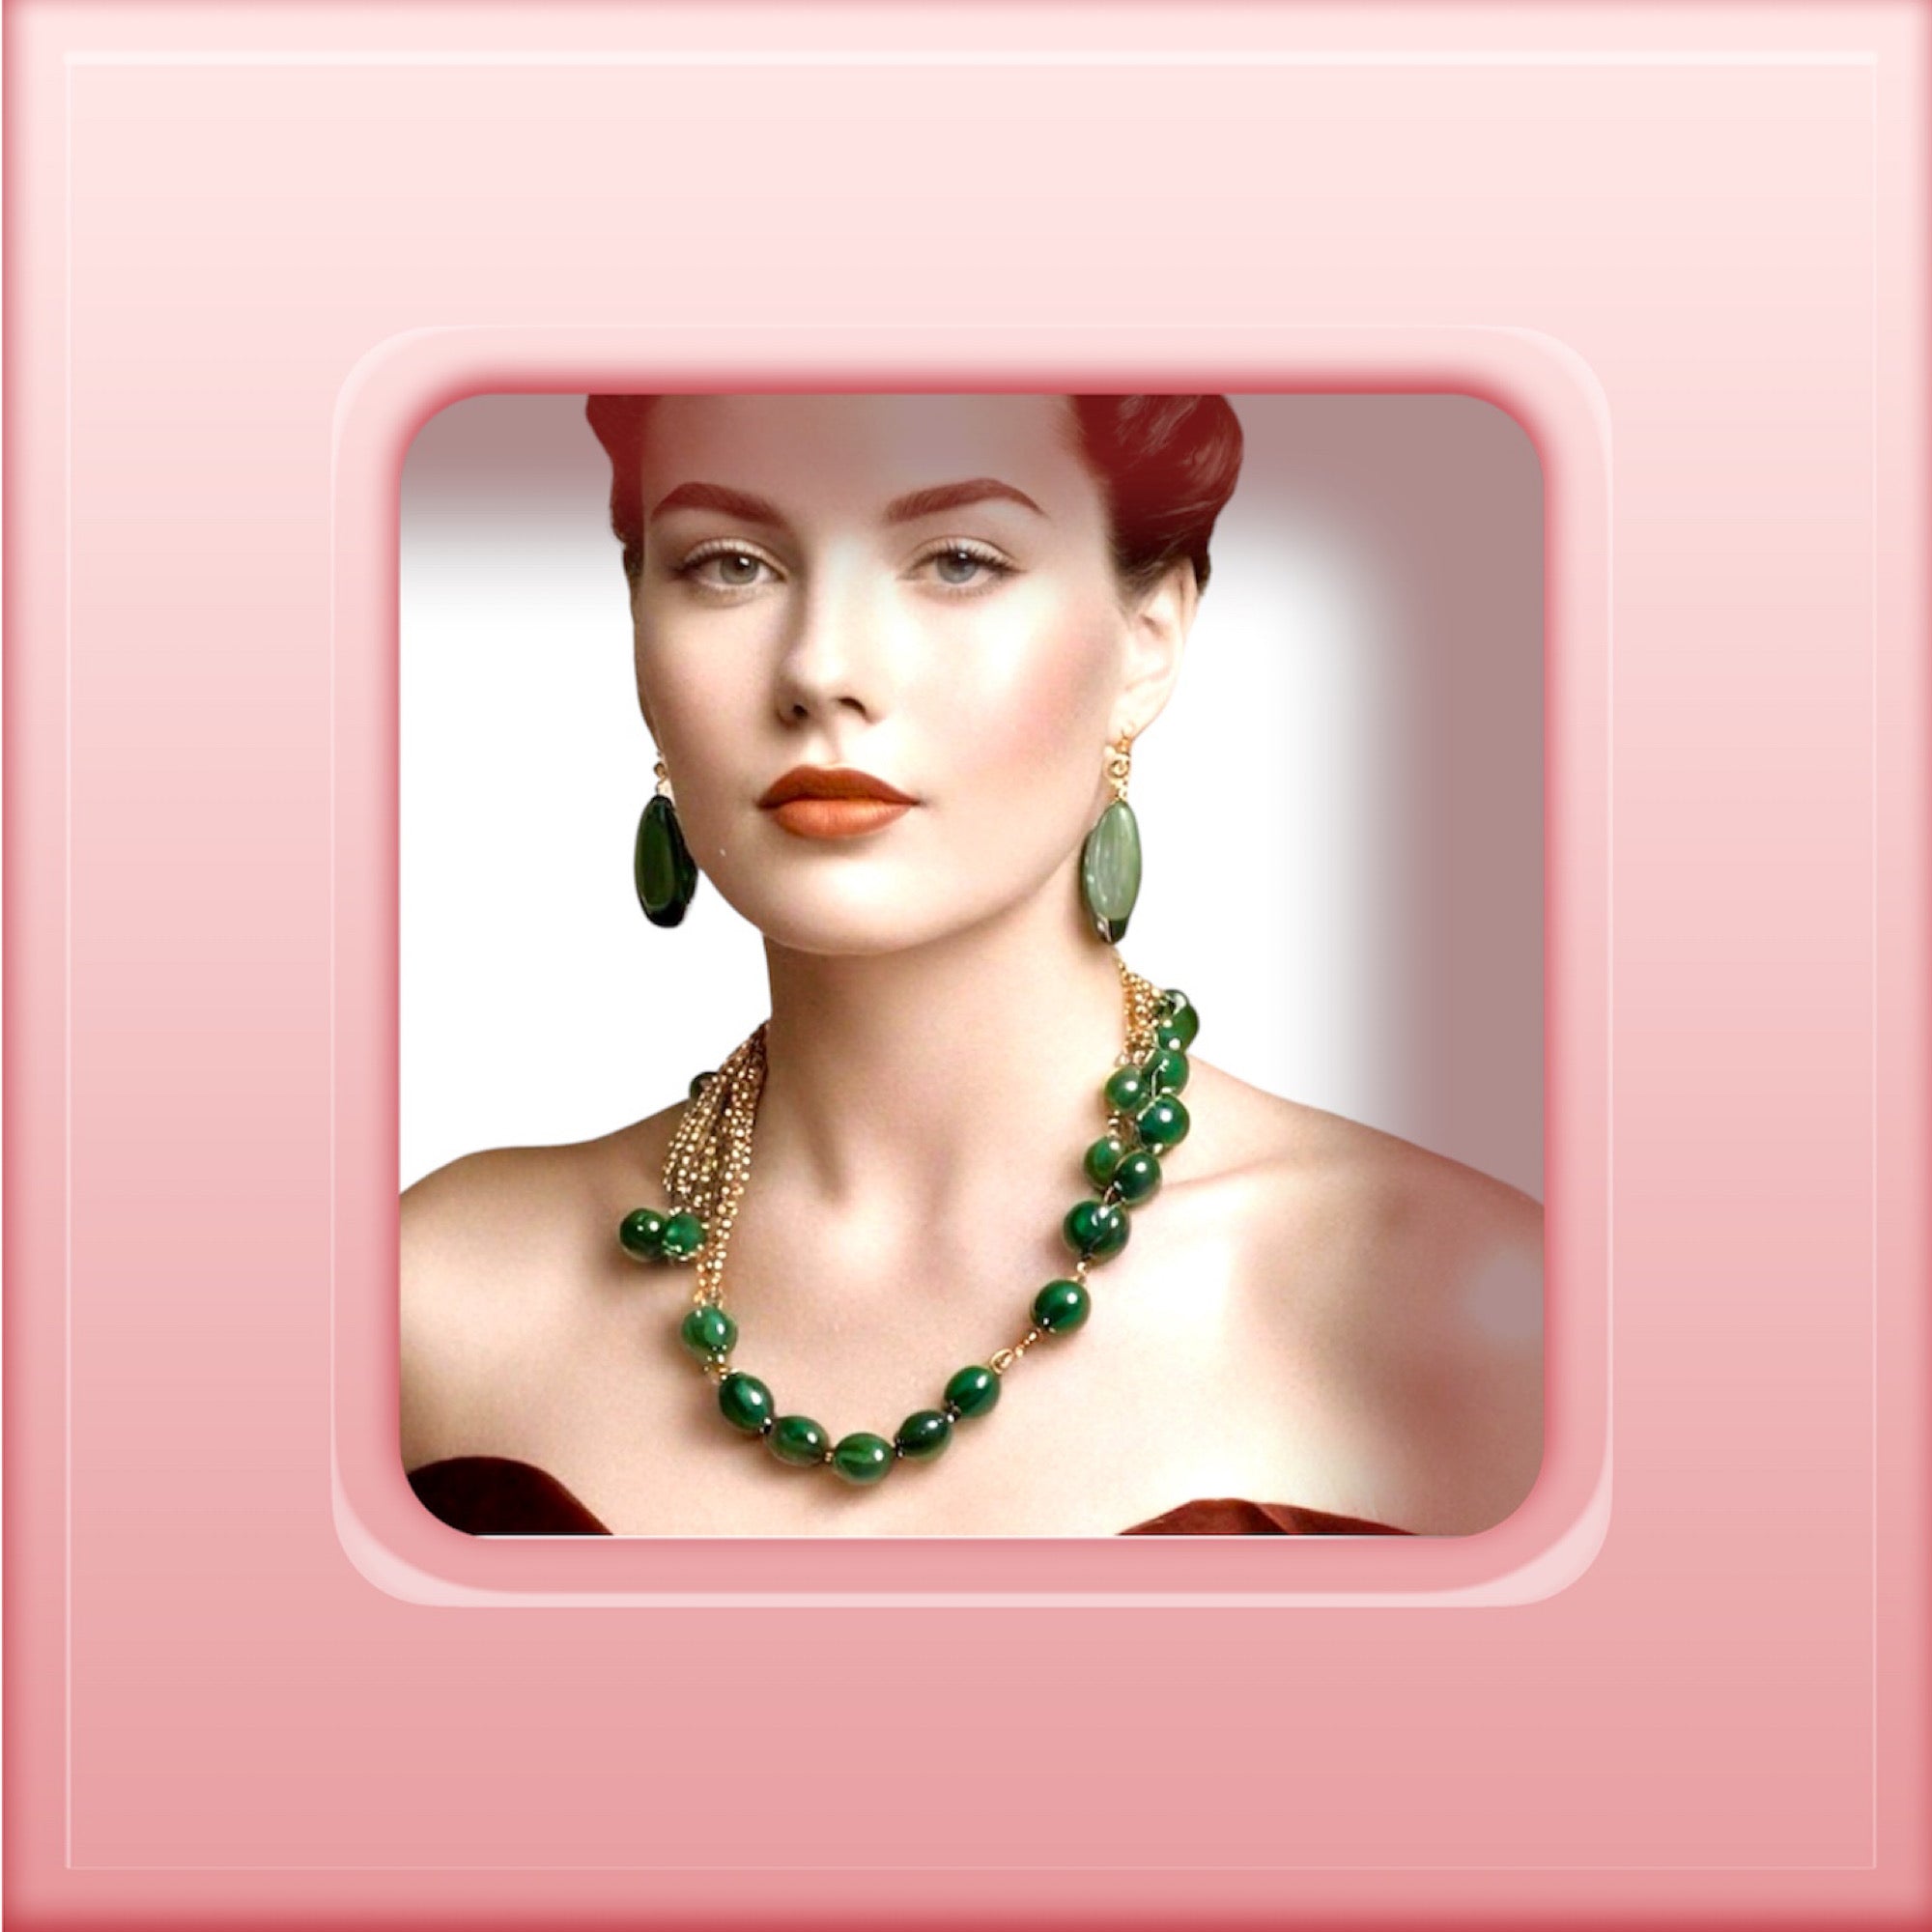 Women wear a green Bakelite beaded necklace with matching gree earrings that dangle